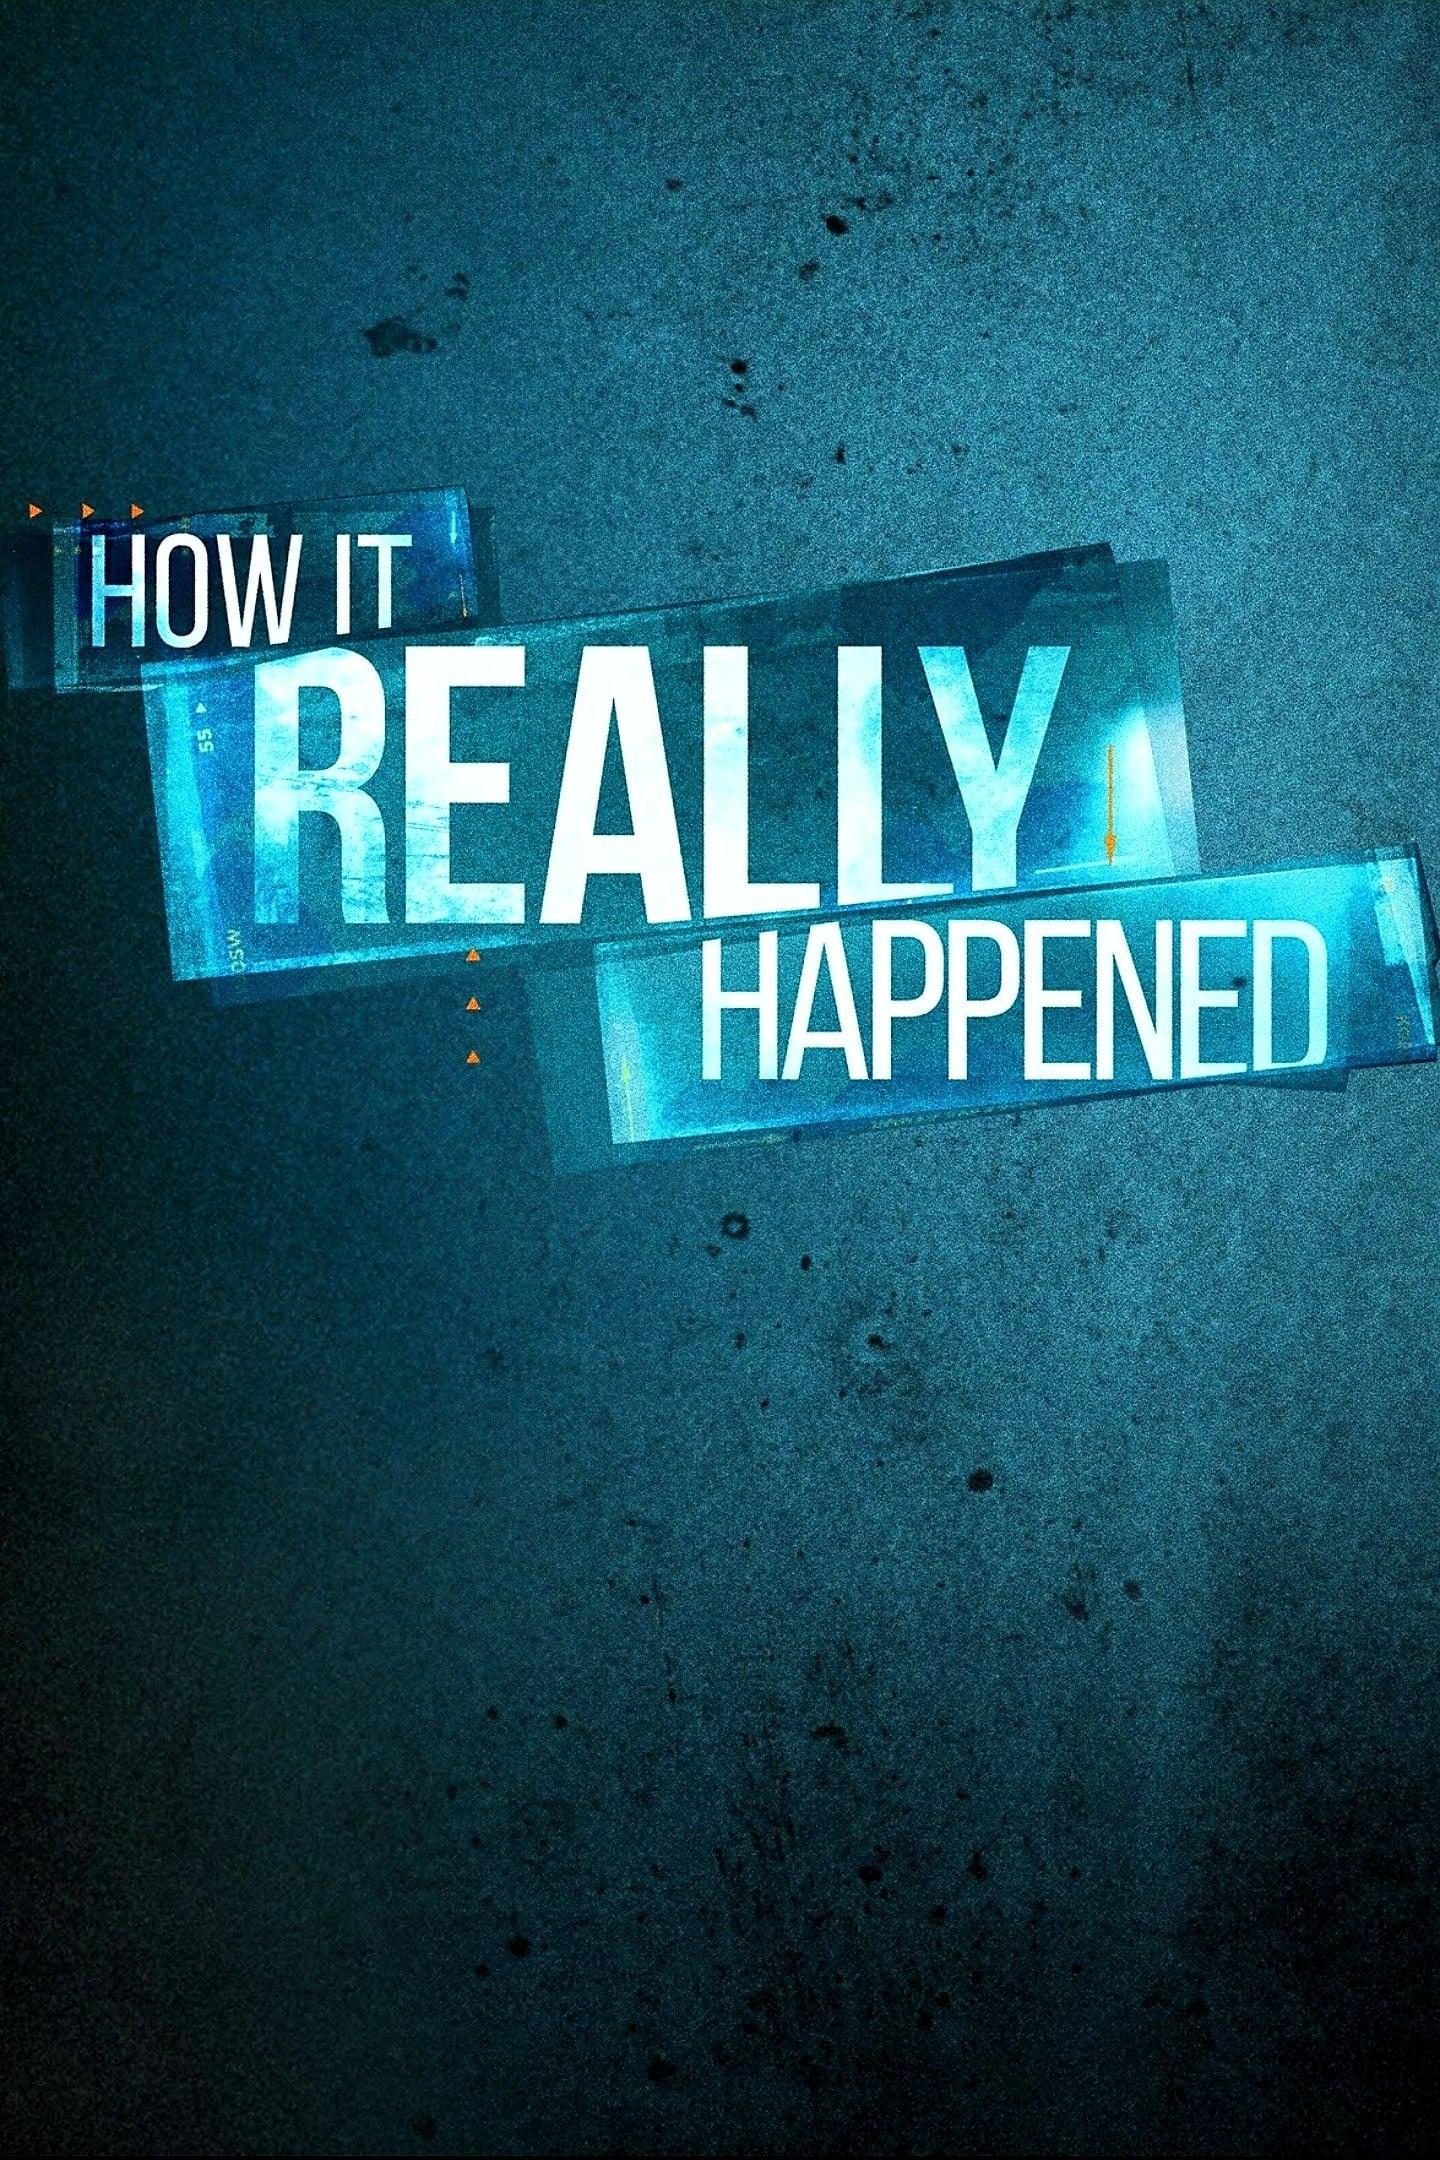 How It Really Happened poster